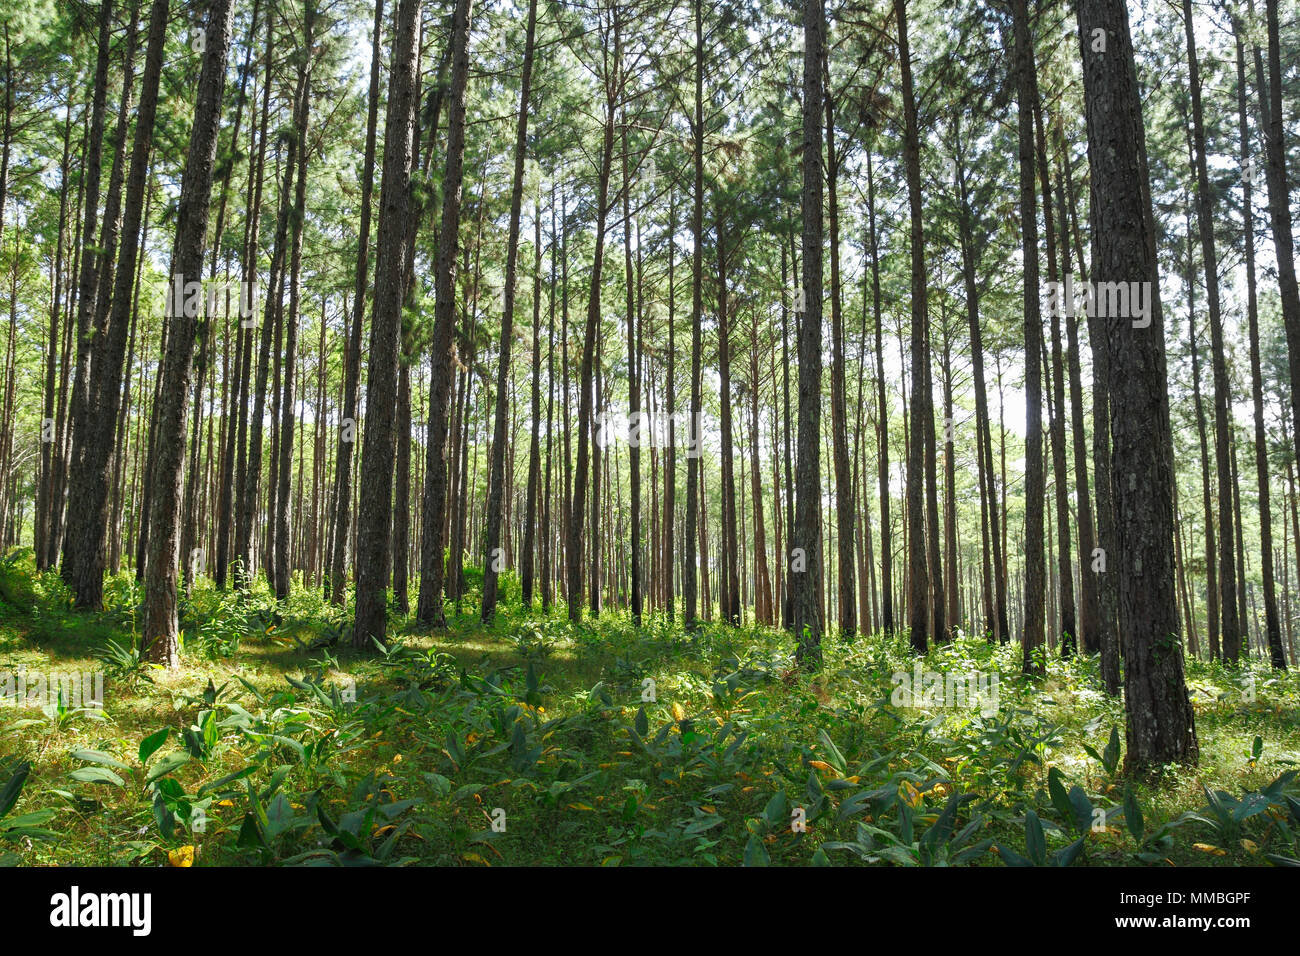 Pine tree forest cover with ginger family (Zingiberaceae) plant on the ground. Taken from Southeast Asia. Stock Photo